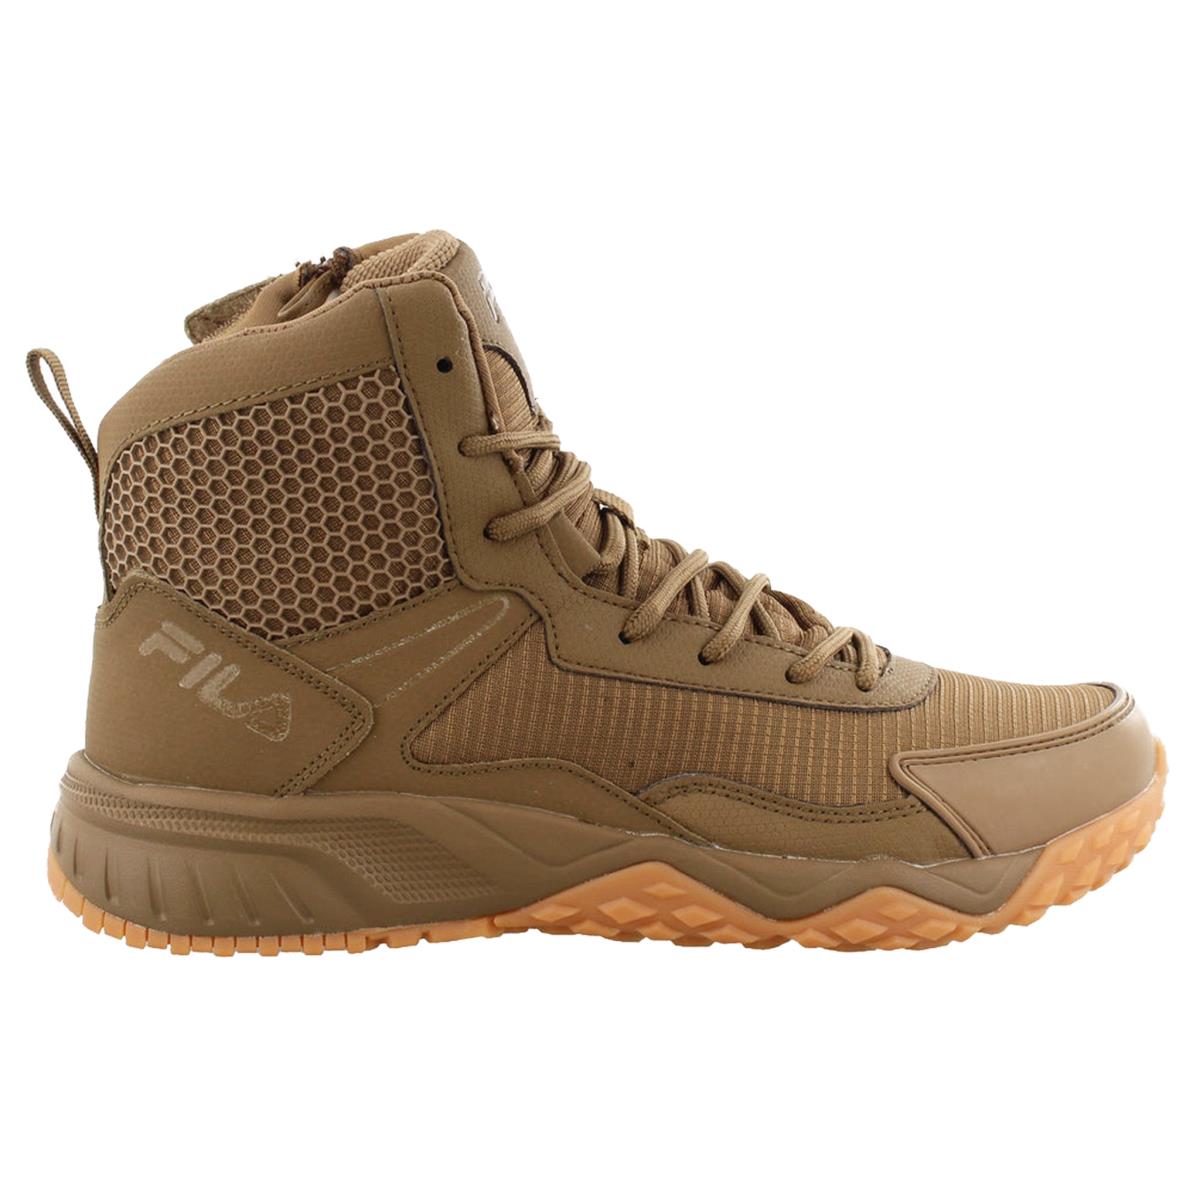 Fila Men`s Chastizer Tactical High Top Casual Fashion Combat Work Shoes Boots Warm Sand/Gum